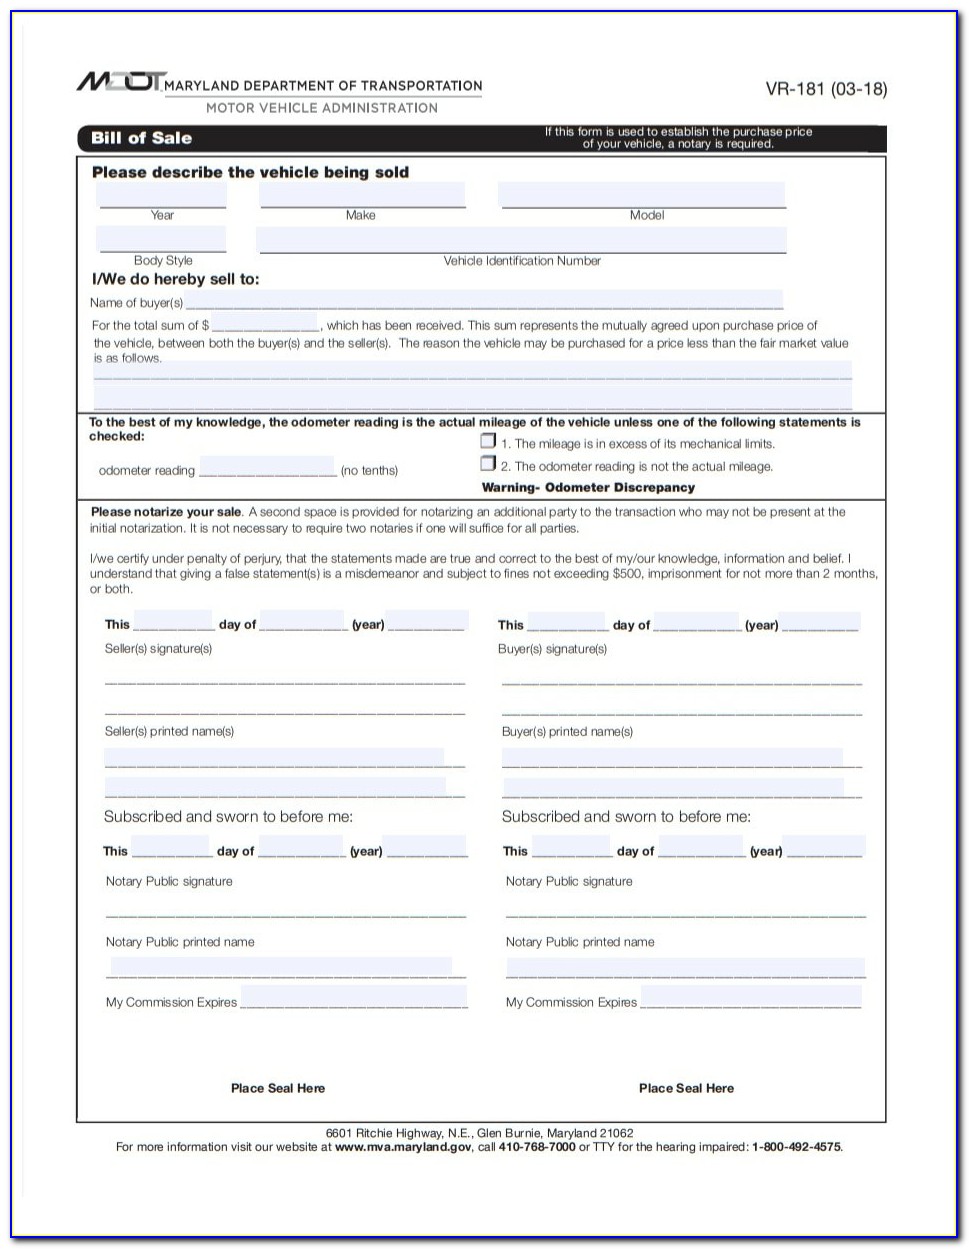 Billing Invoice Template Word